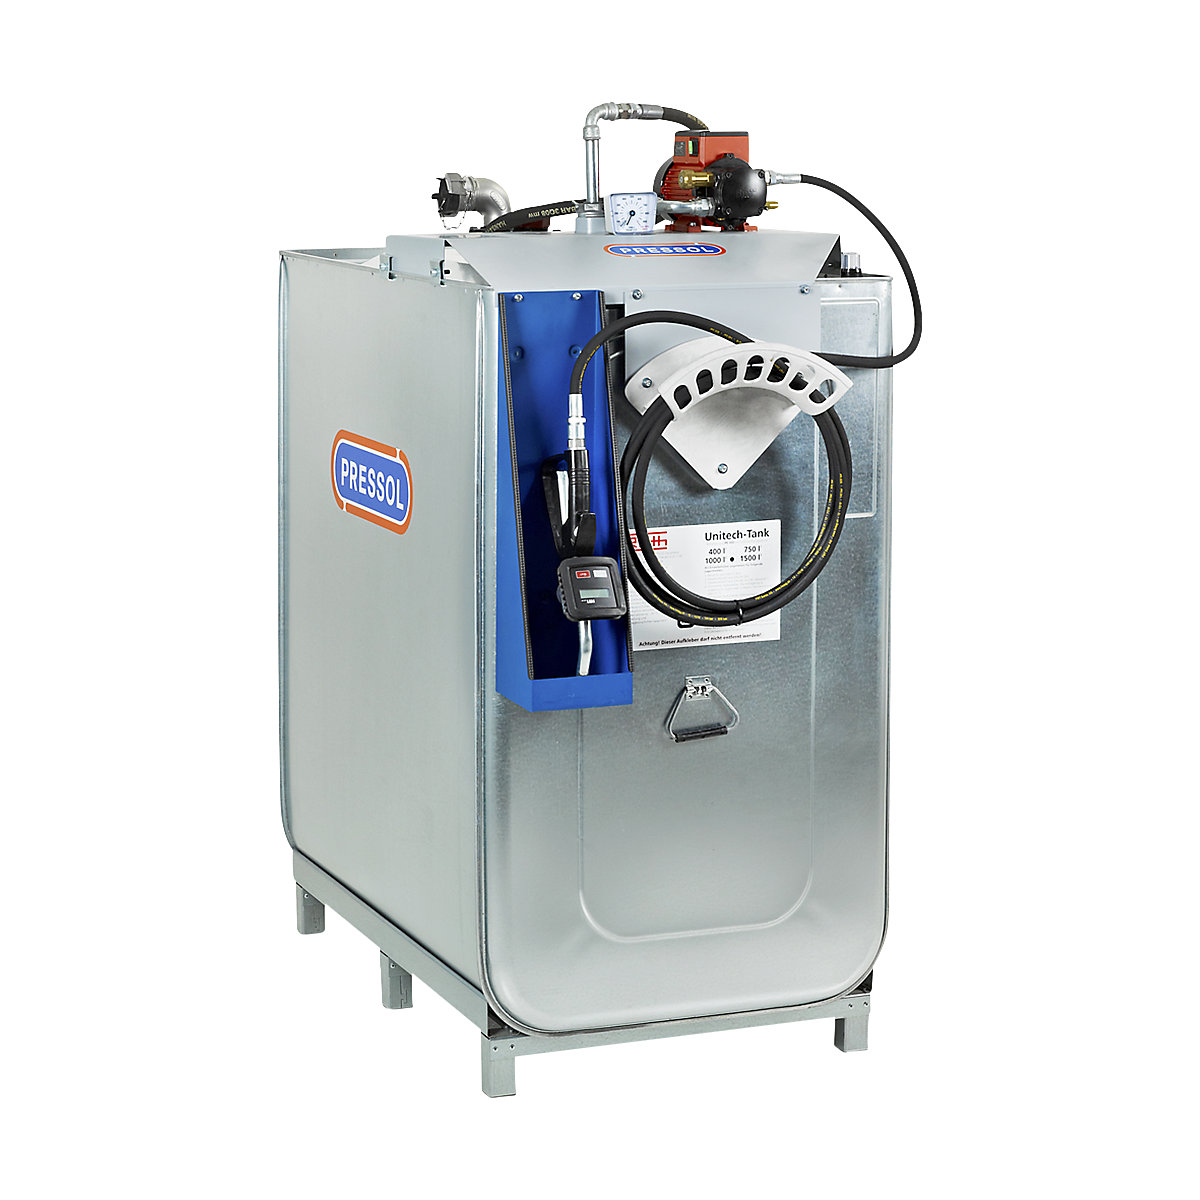 Compact oil tank system for fresh oil / low flammability oils - PRESSOL